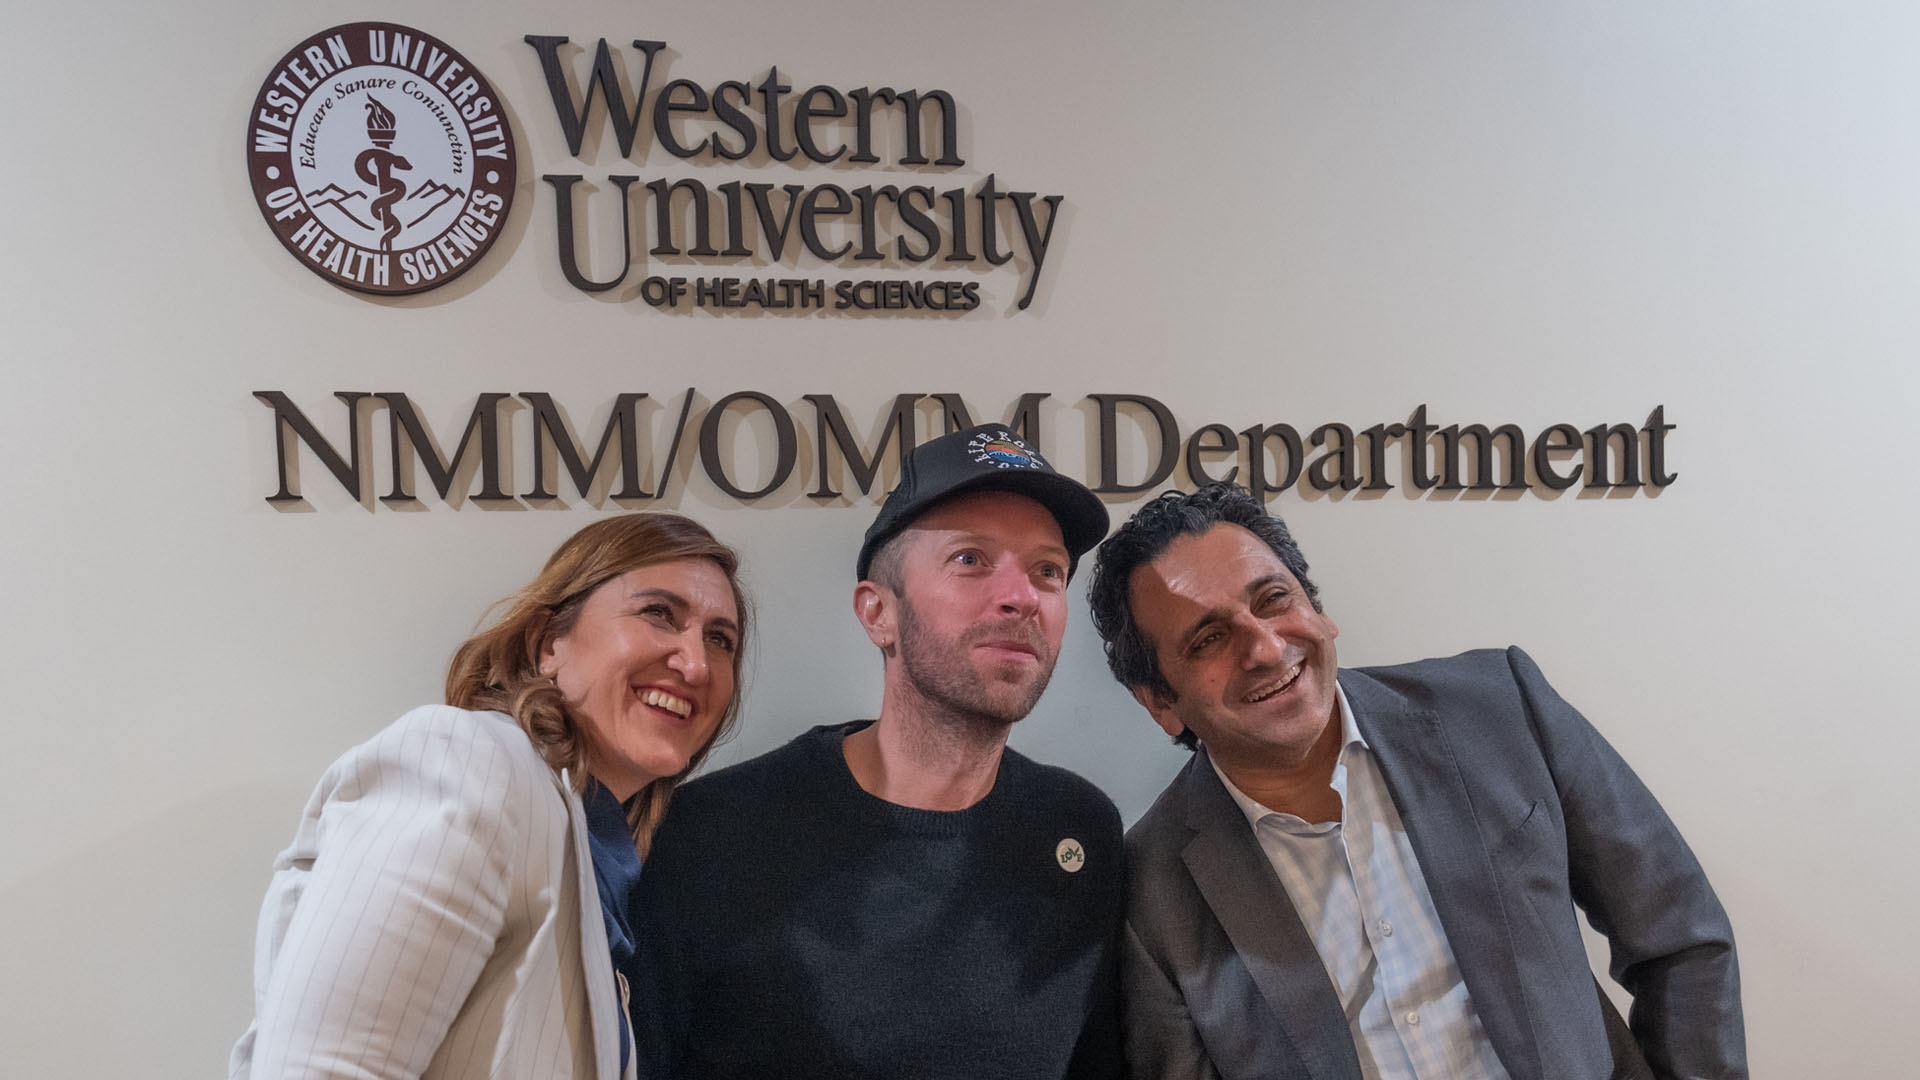 Love Button Founders and Chris Martin of Coldplay Visit Western University of Health Sciences for Love Button’s Integrative Medicine Research & Outreach Program